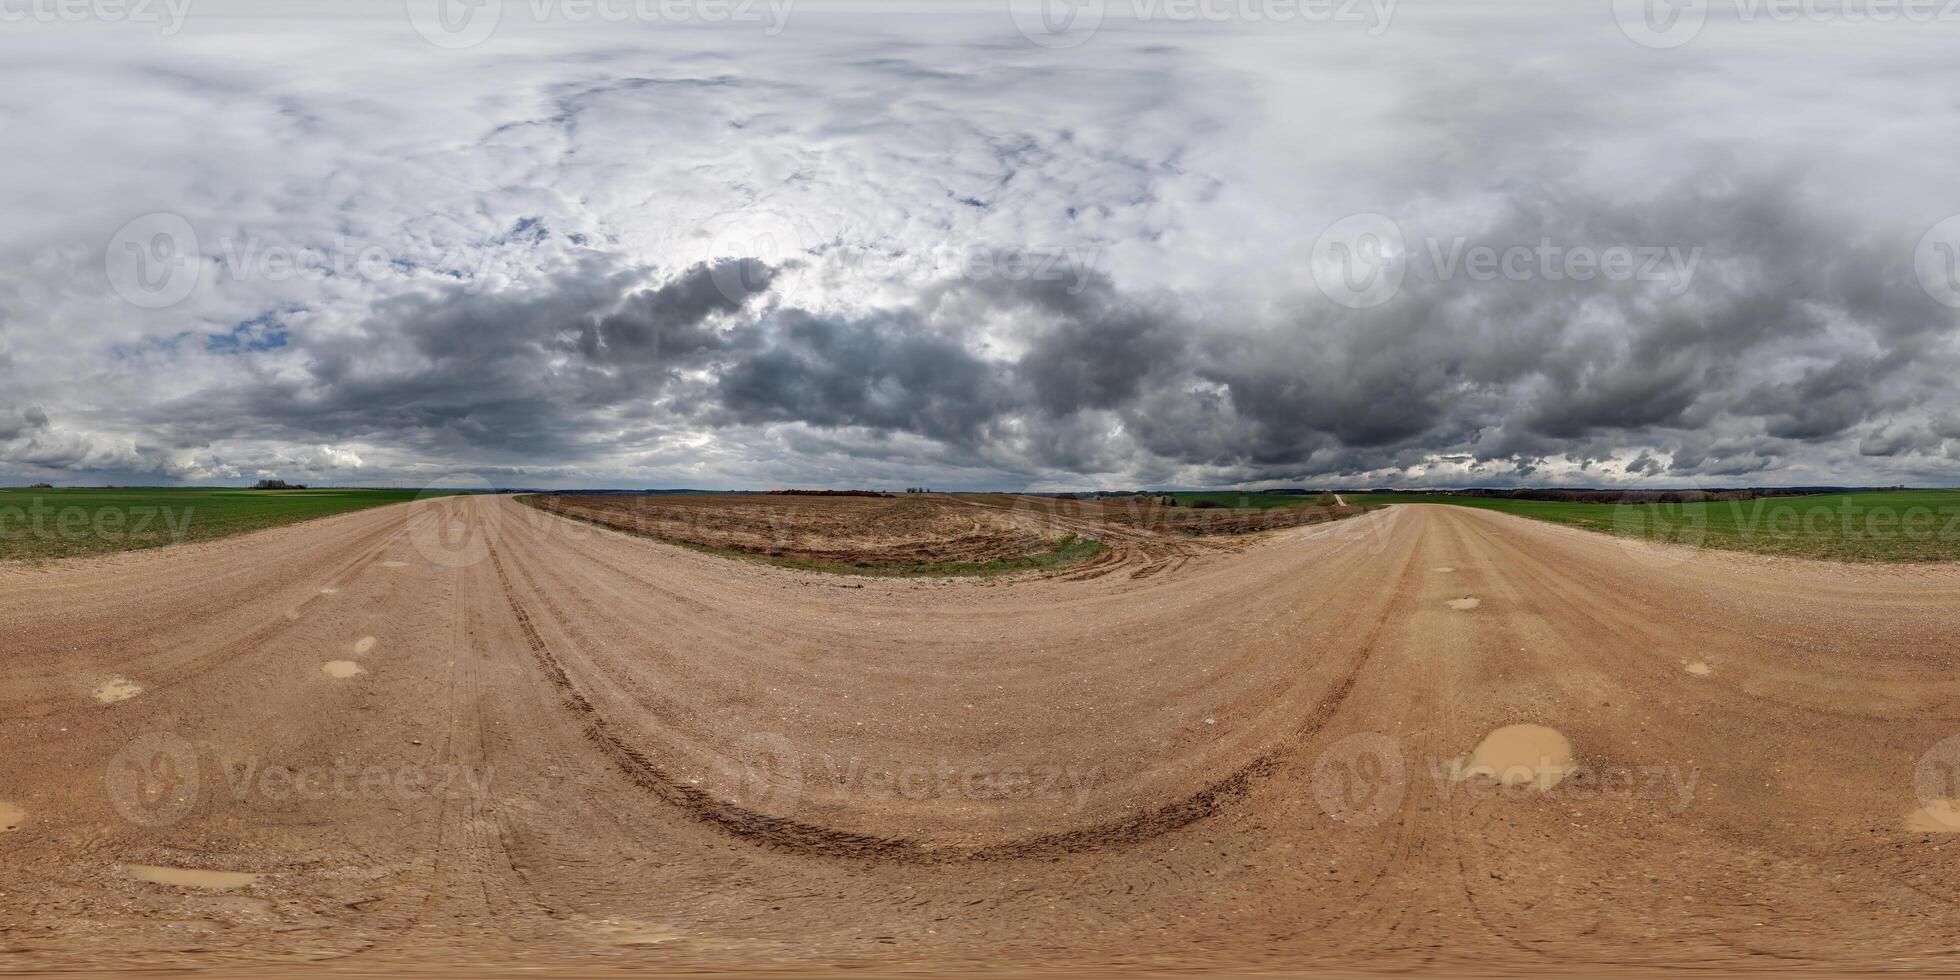 hdri 360 panorama on wet gravel road among fields in spring nasty day with storm clouds in equirectangular full seamless spherical projection, for VR AR virtual reality content photo